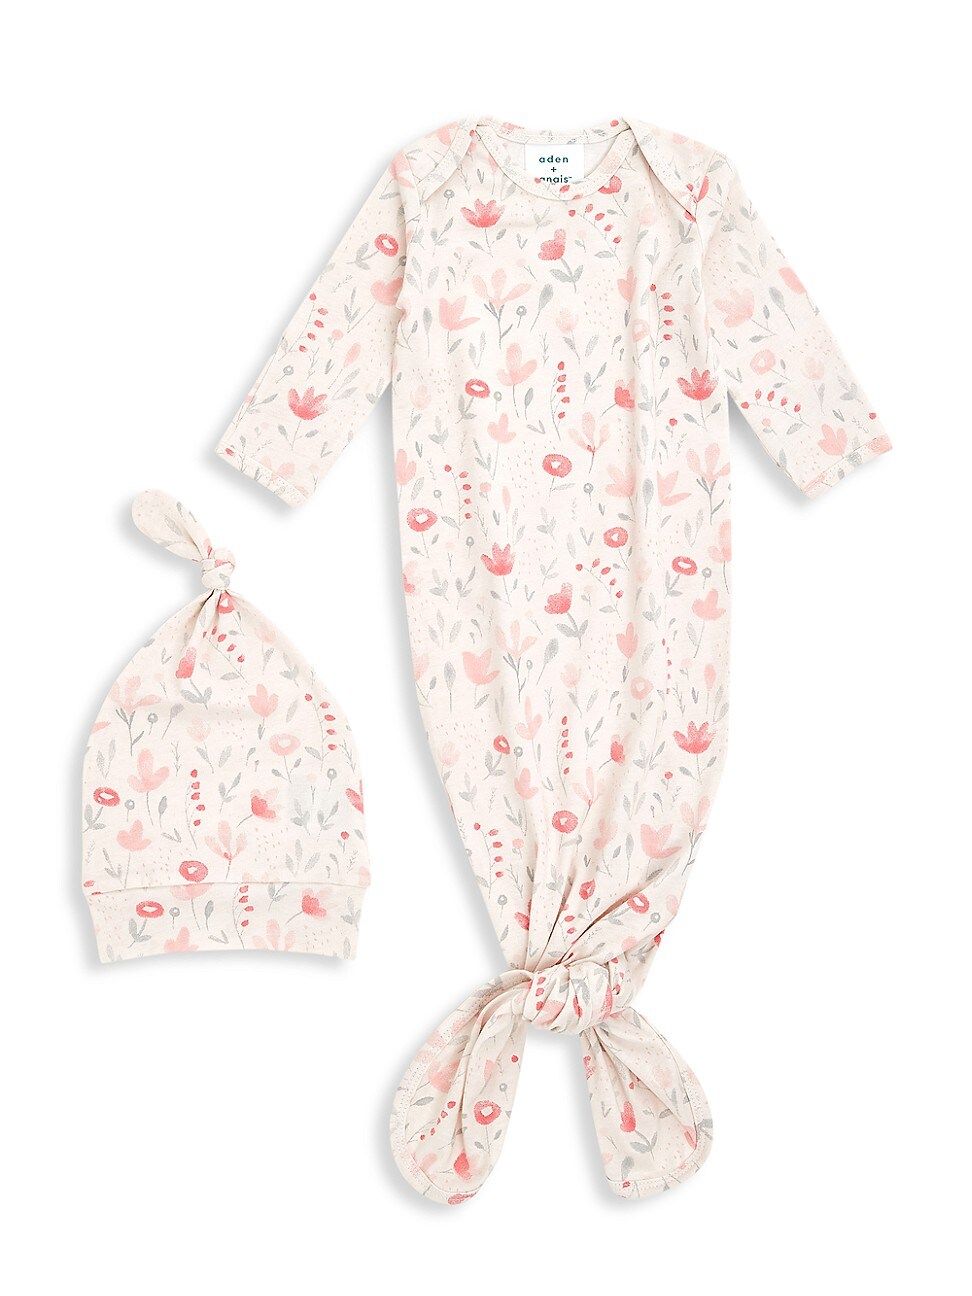 aden + anais 2-Piece Infant Girl Perennial Comfort Knit Knotted Gown & Hat Set - Pink - Size Newborn | Saks Fifth Avenue